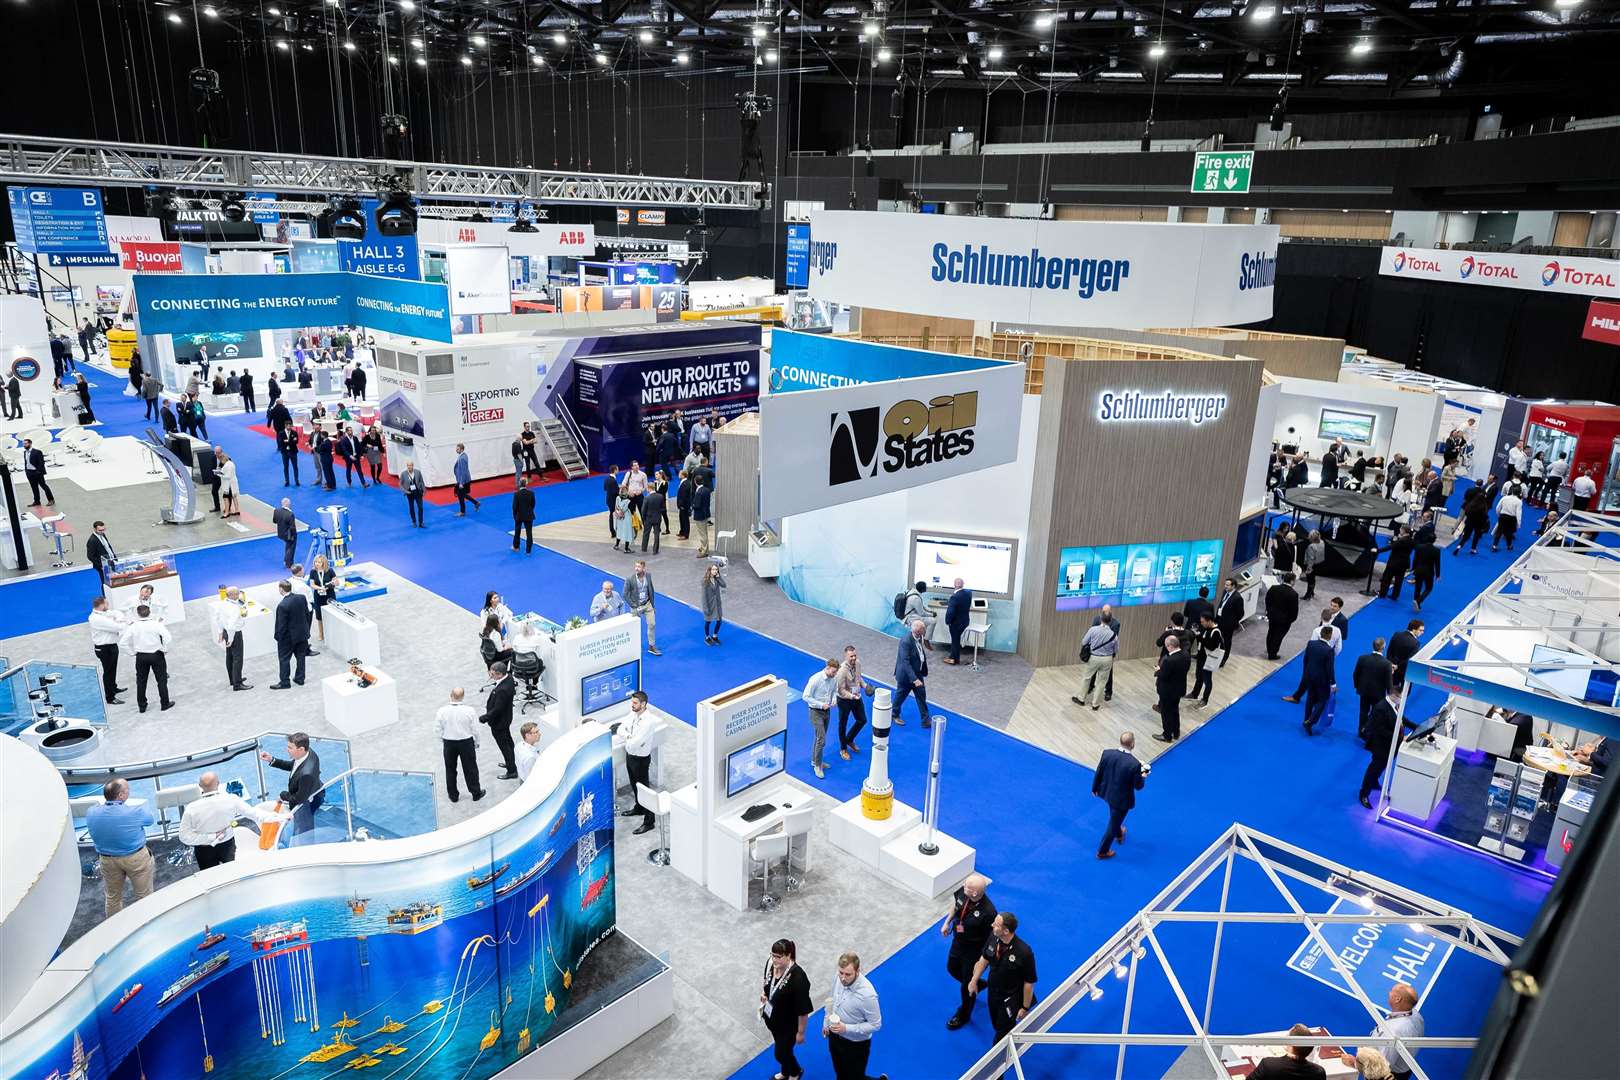 The planned physical SPE Offshore Europe event will be replaced with an online event in September with the face-to-face event now moving to February 2022.